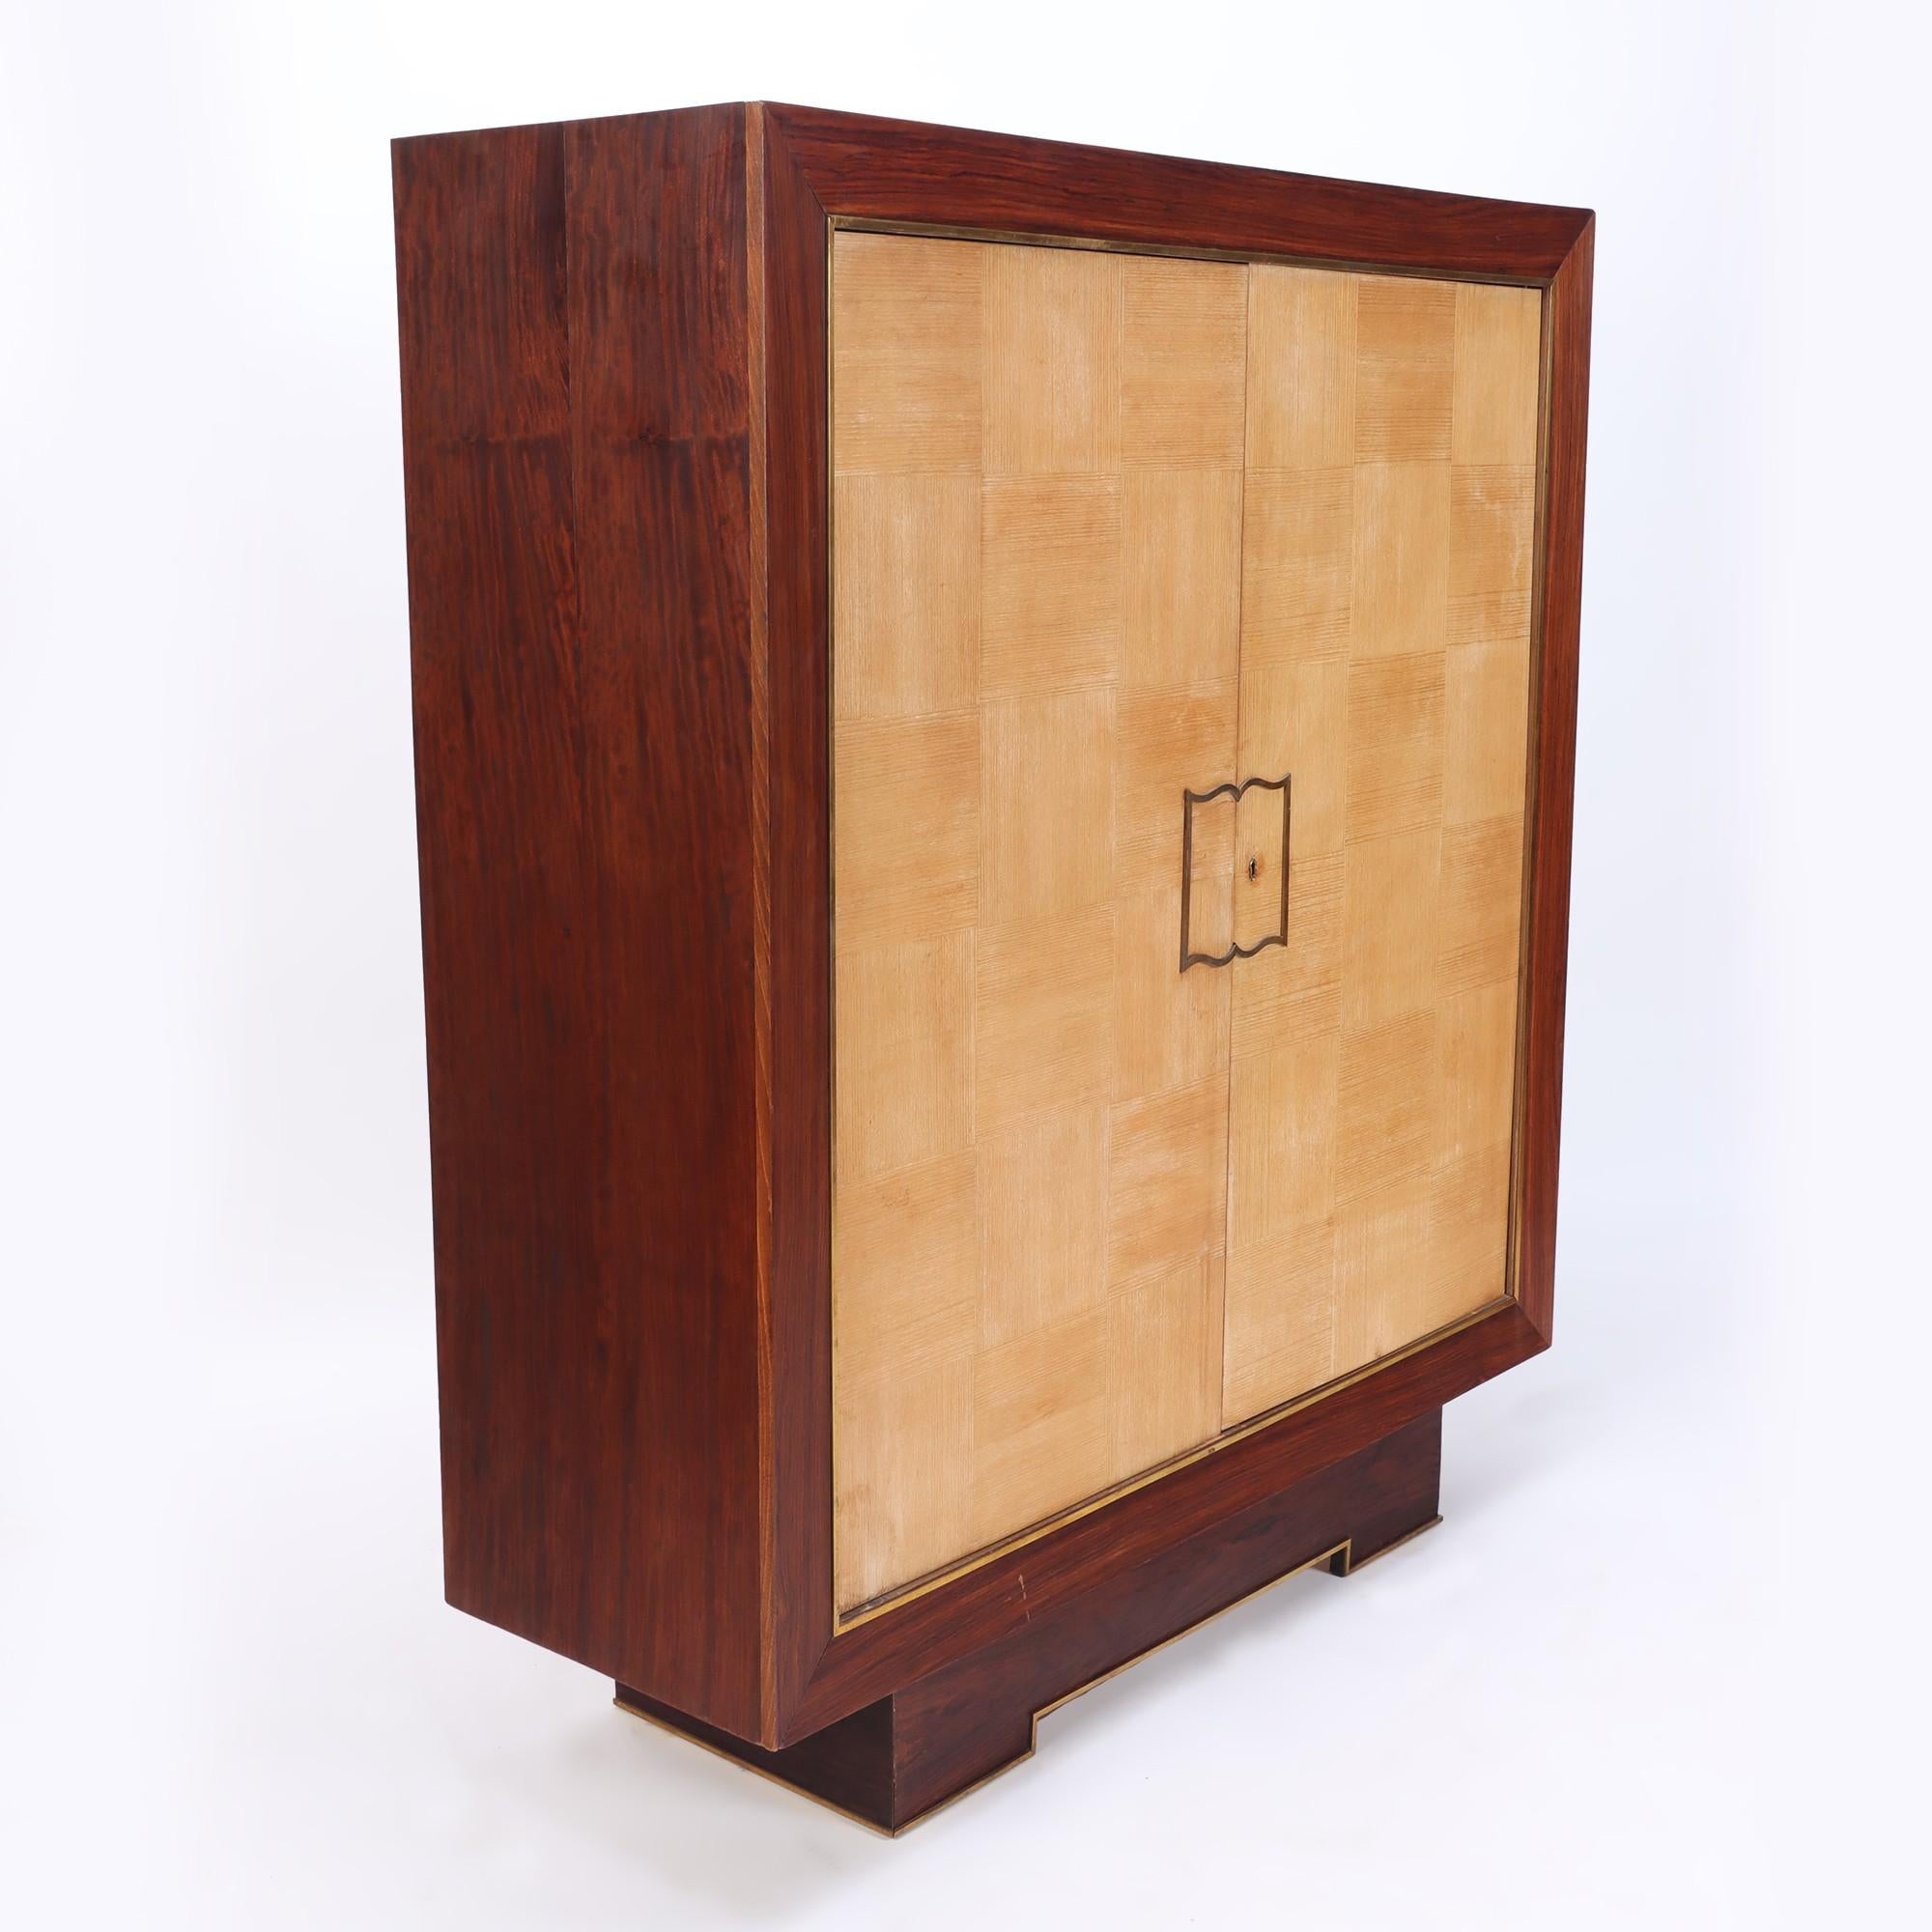 A two door cabinet with gold/bronze accents designed by Jean Royère for Gouffé. C 1935